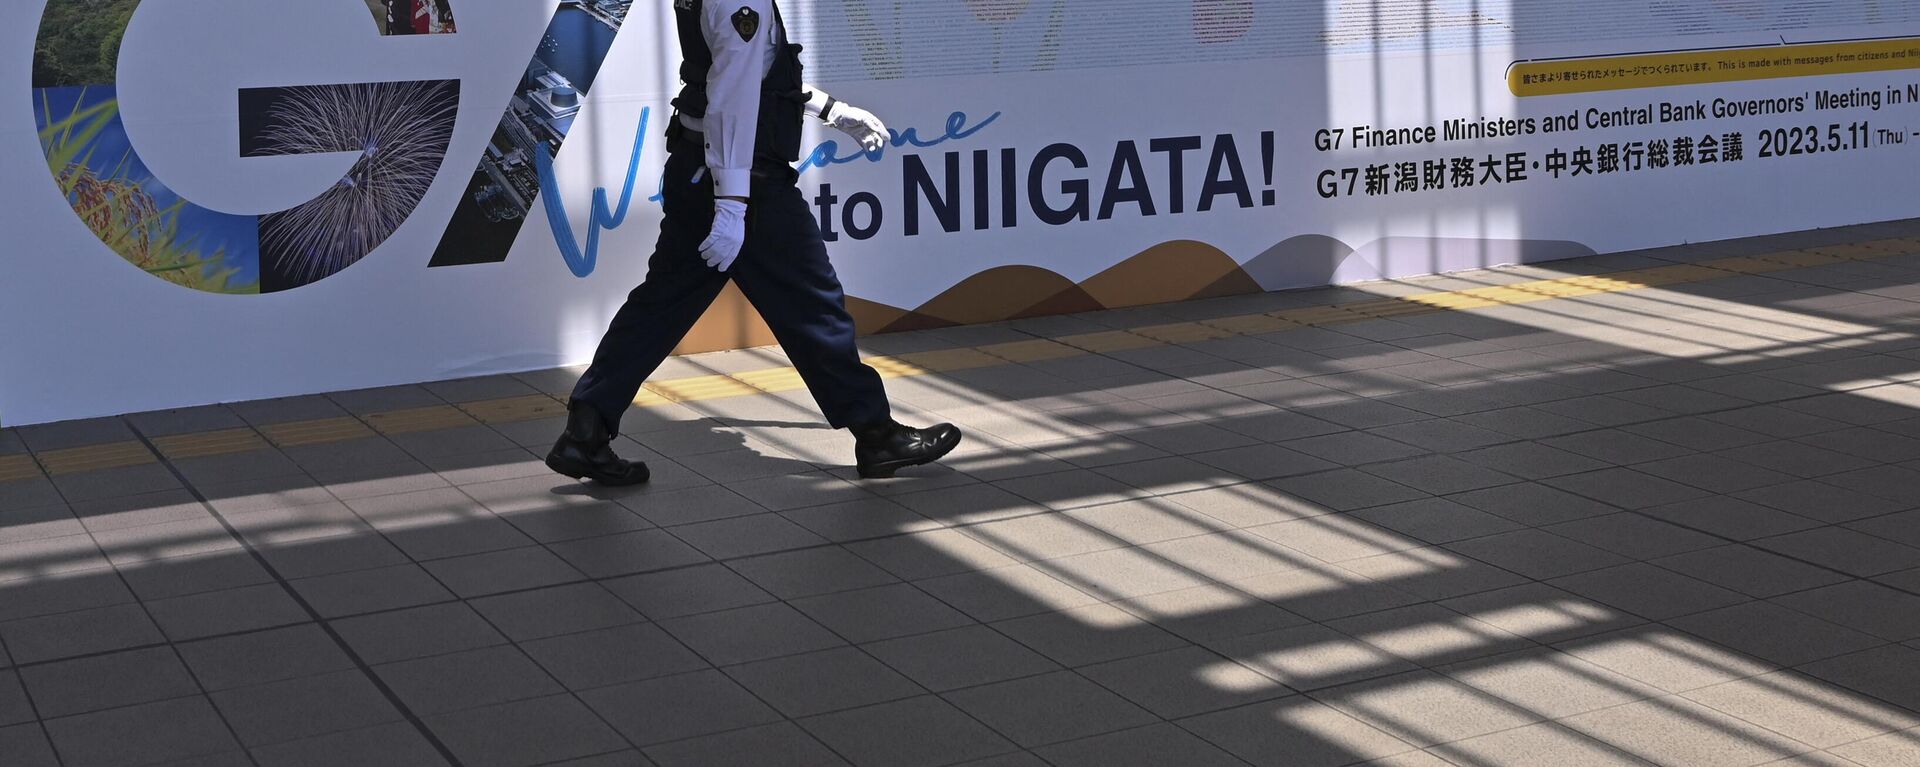 A policemen walks past the logo of the upcoming G7 Finance Ministers and Central Bank Governors' Meeting displayed at Niigata railway station in Niigata on May 10, 2023 - Sputnik International, 1920, 28.10.2023